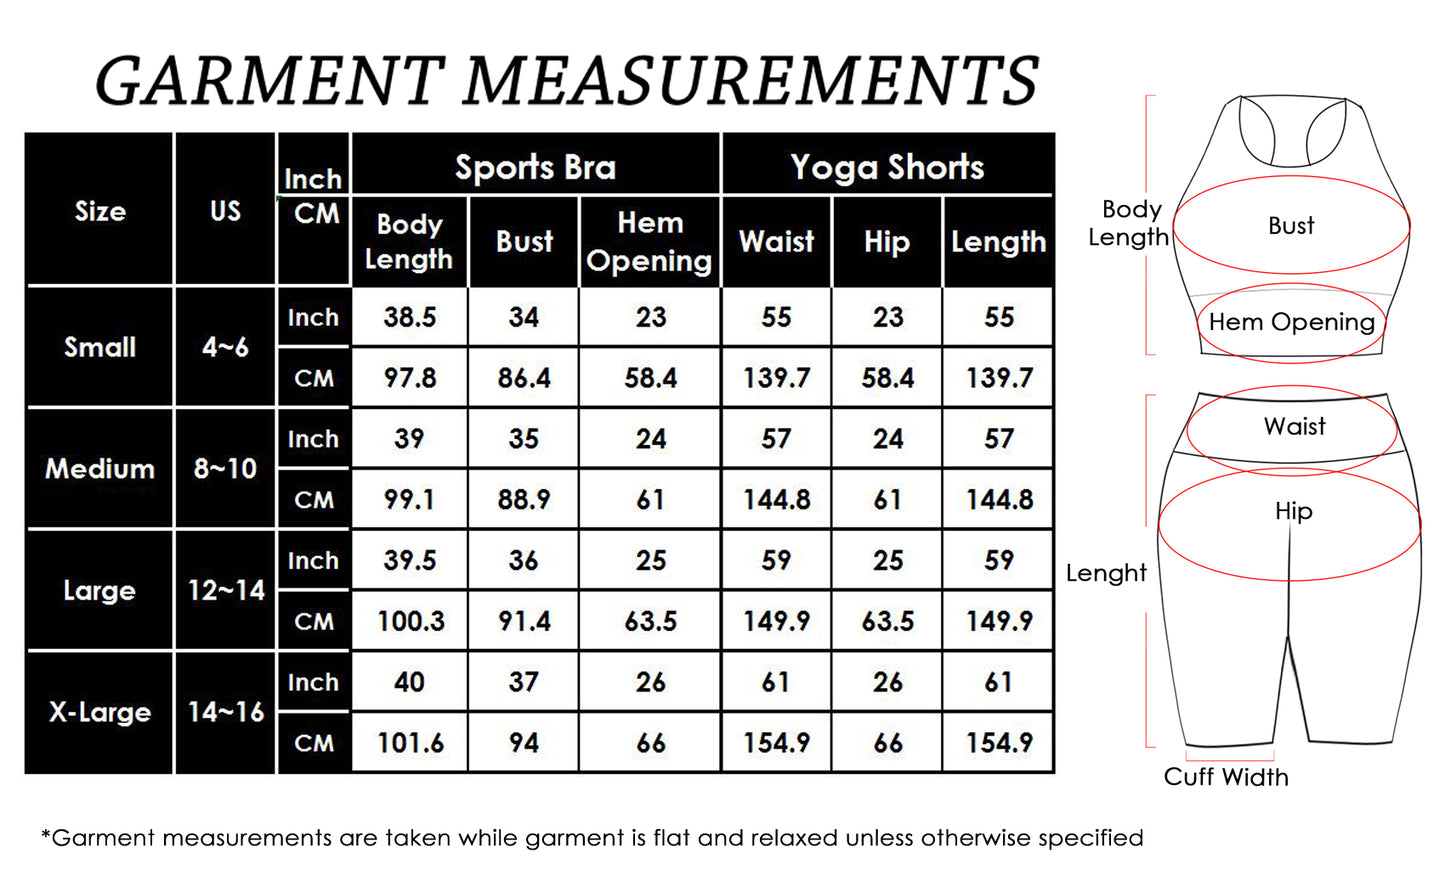 Seamless Yoga Workout Set for Stretchy 2 Piece Outfits Raceback Crop Top High Waist Gym Shorts